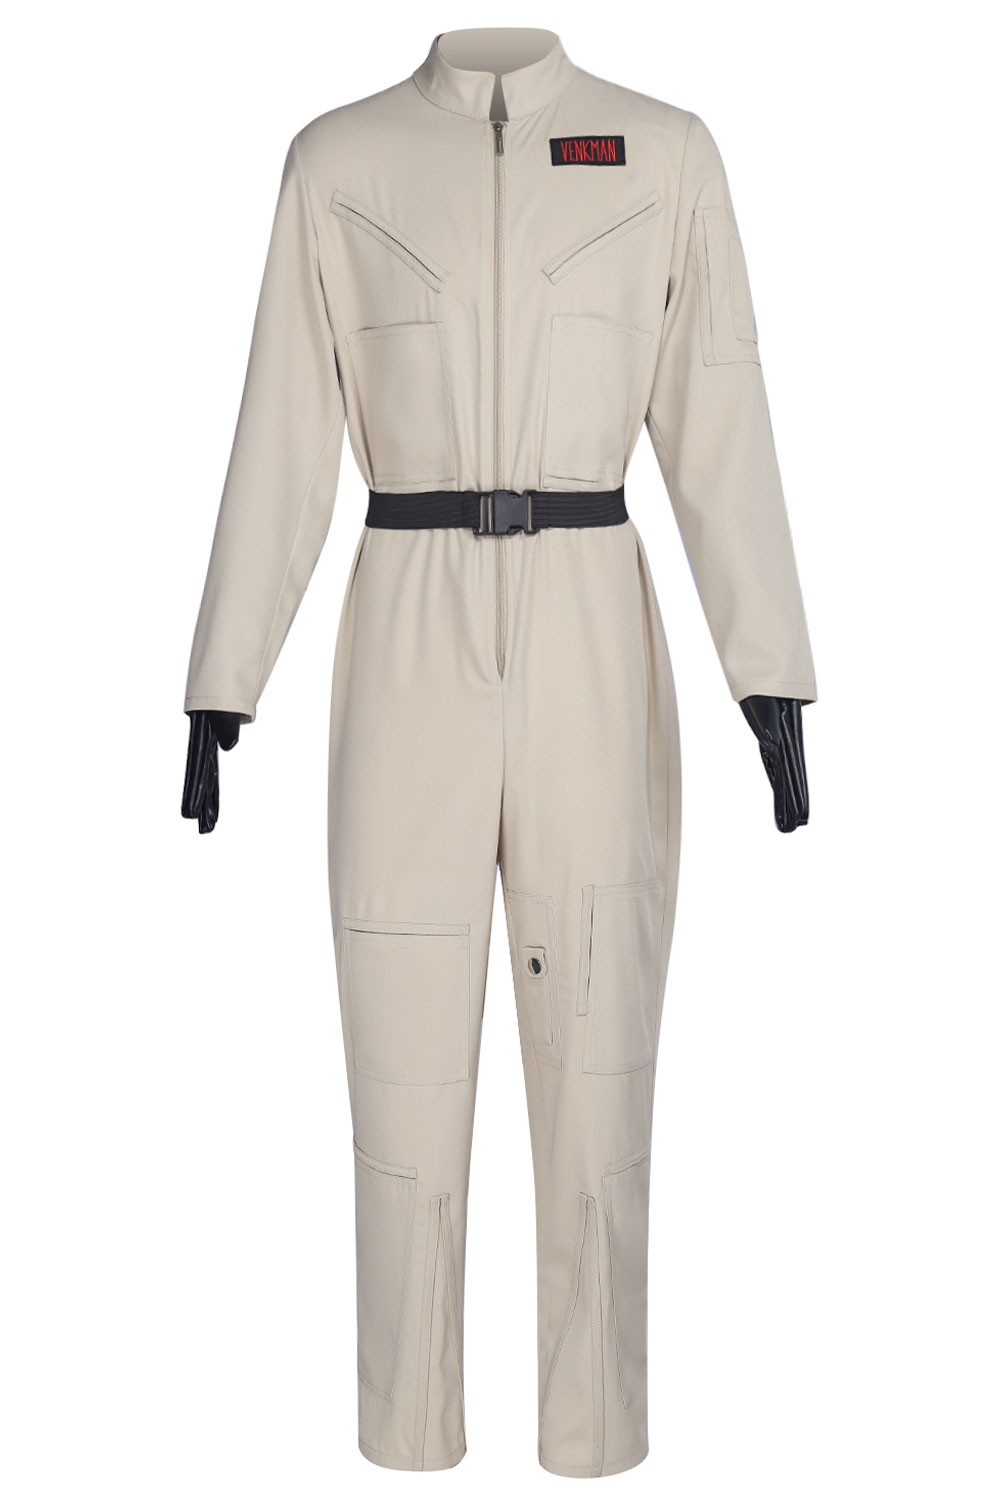 Movie Ghostbusters 2024 Peter Venkman Jumpsuit Outfits Halloween Carnival Suit Cosplay Costume